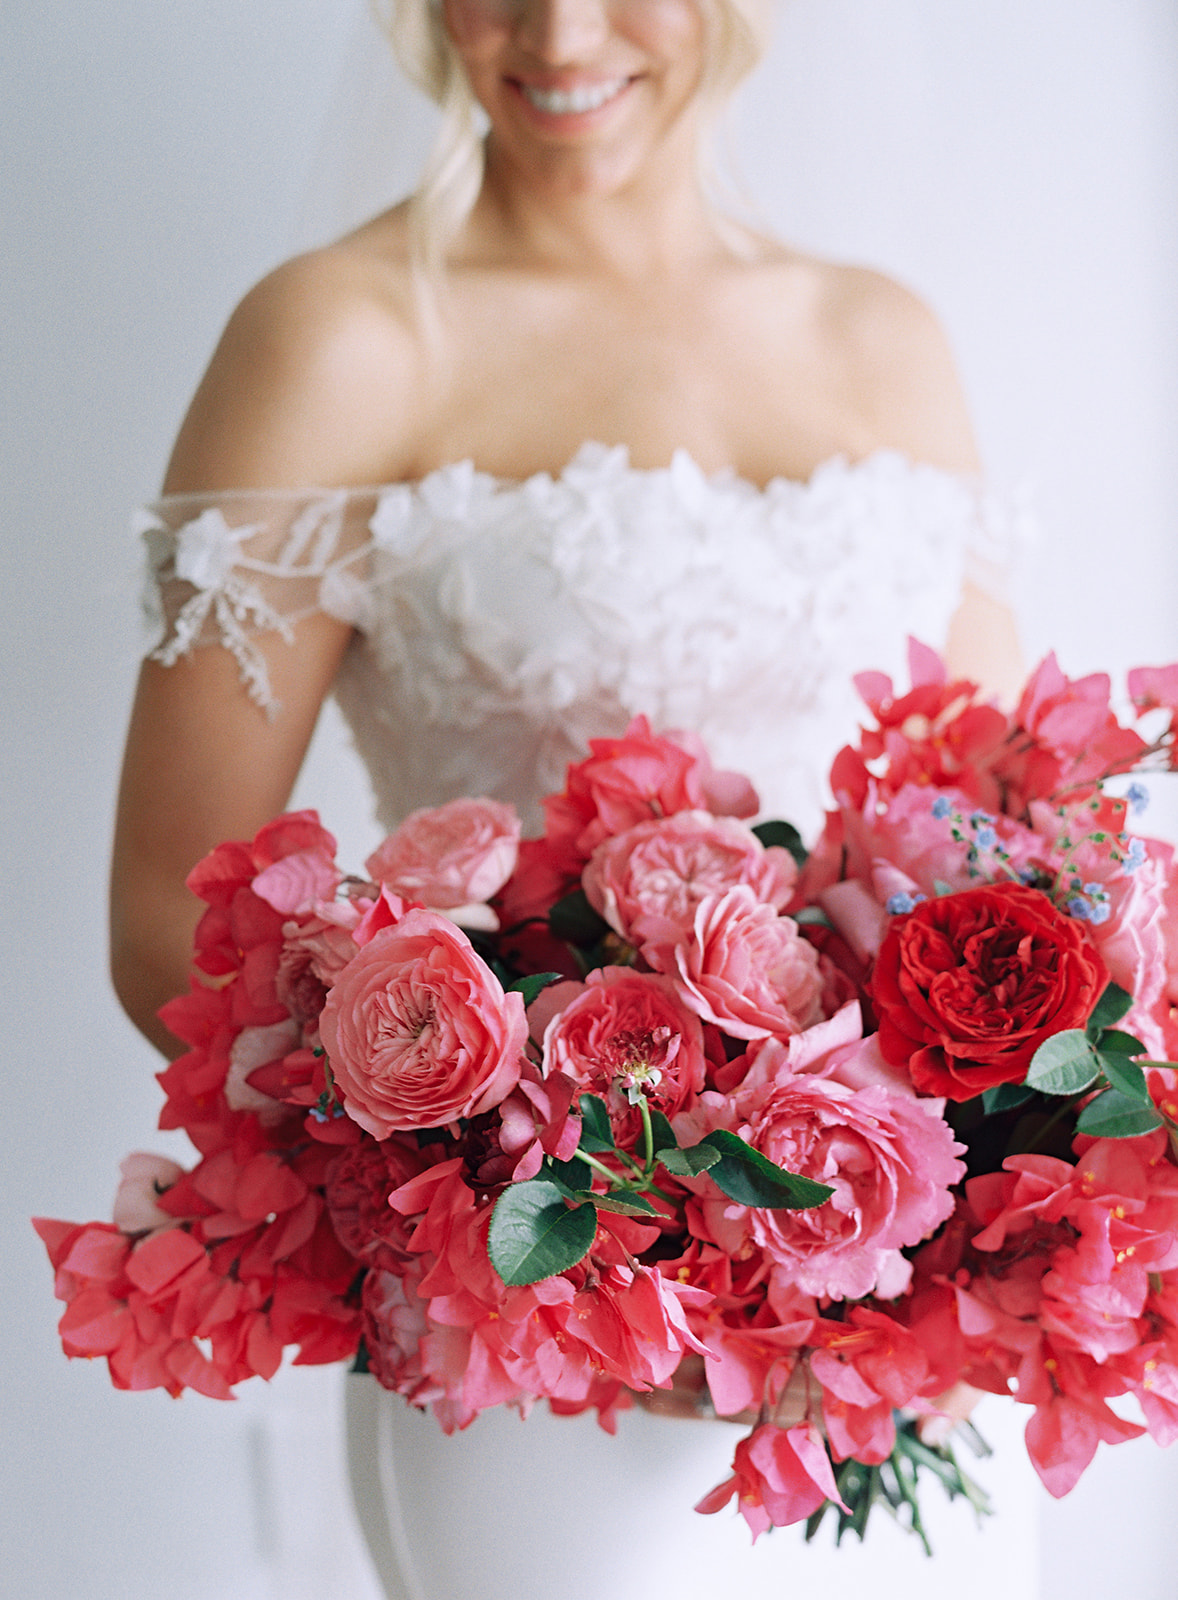 CLOSE UP OF BRIDE HOLDING PINK BRIDAL BOUQUET